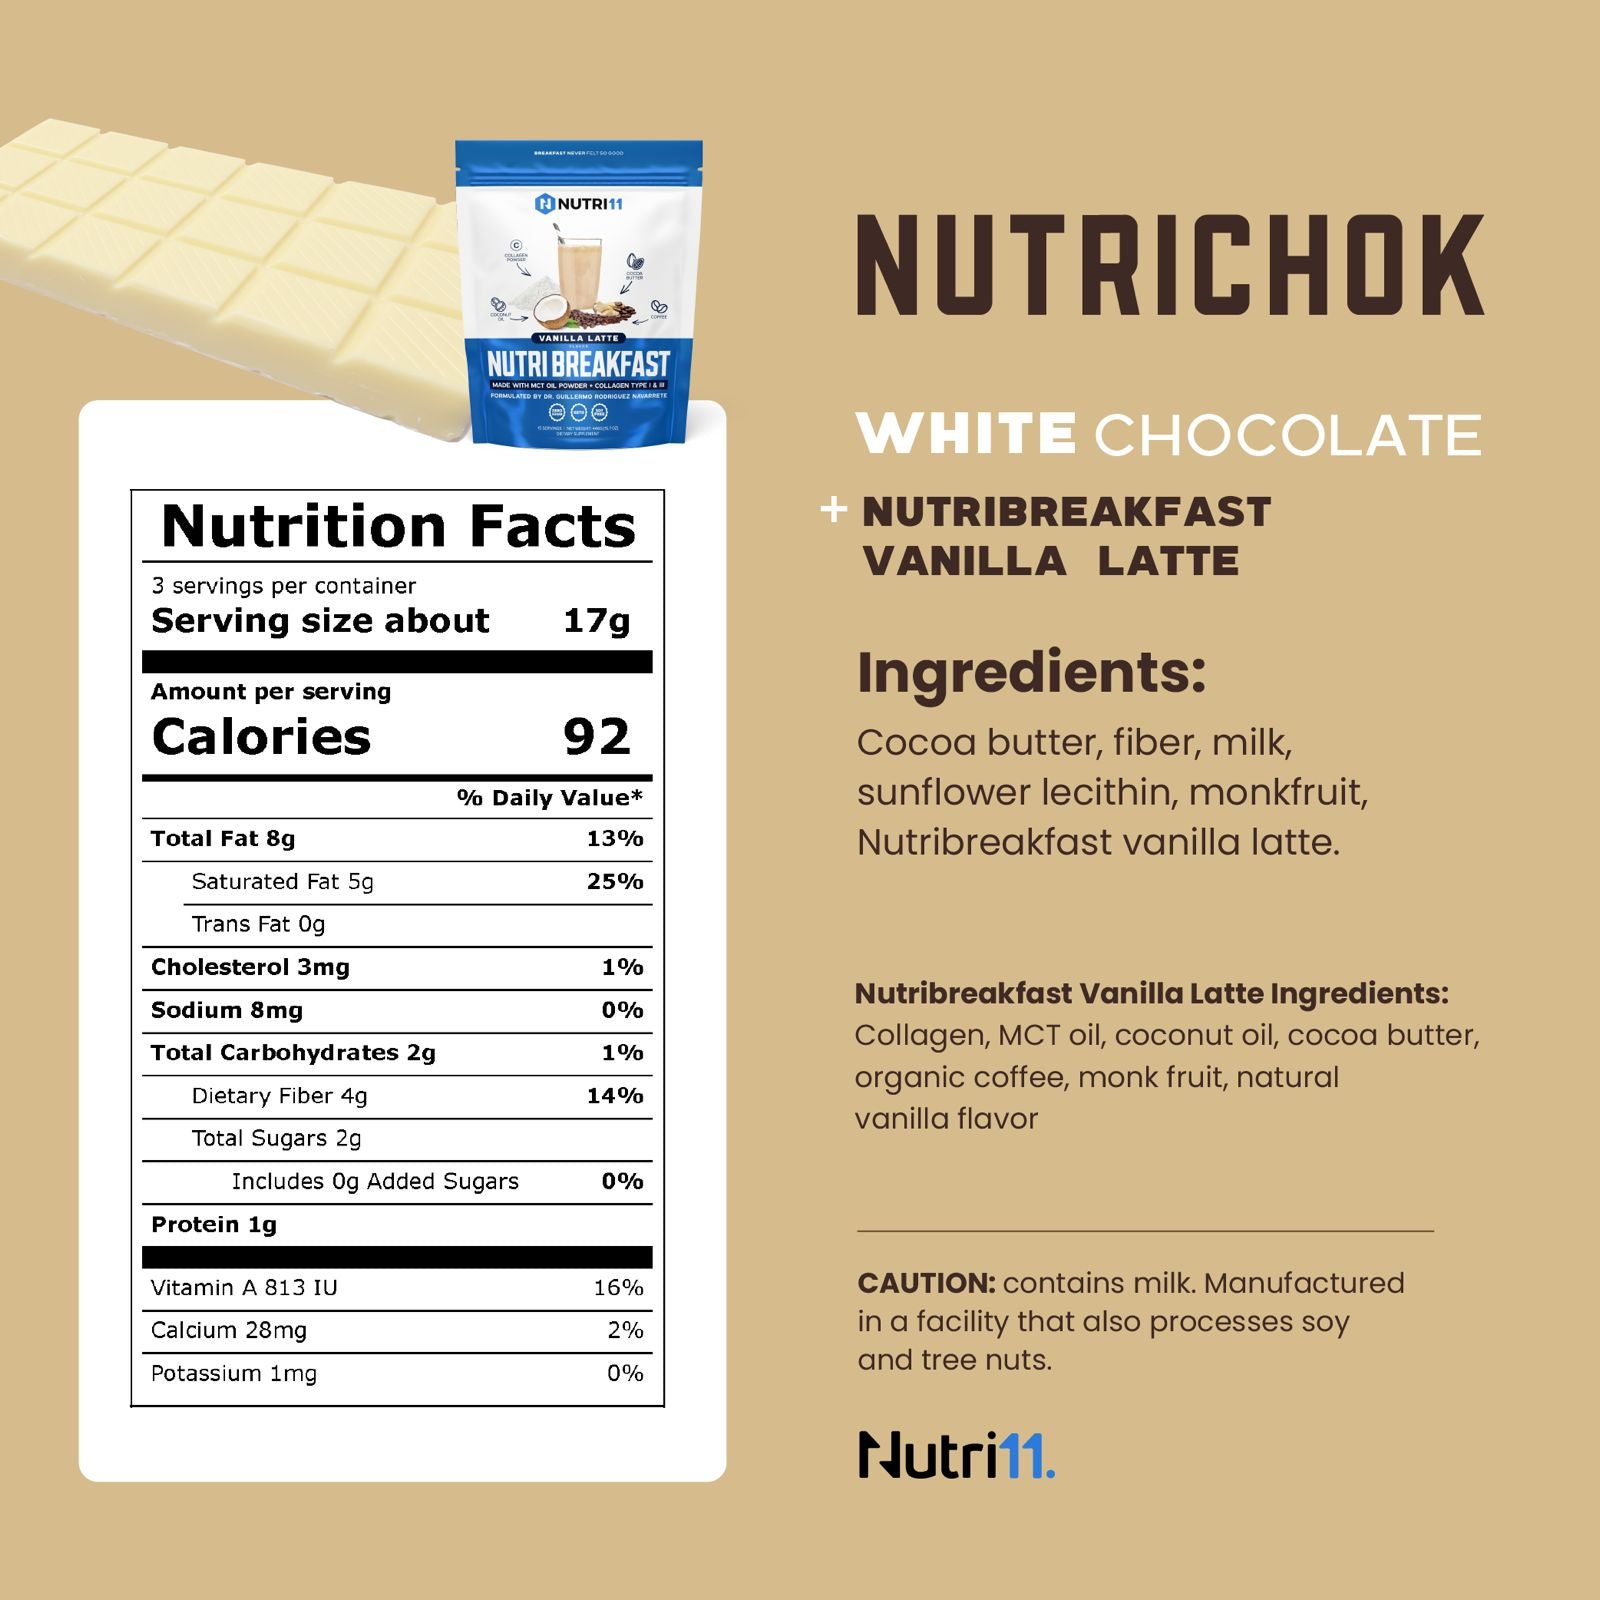 Nutrichok - White Chocolate Bars Variety Pack - Limited Edition